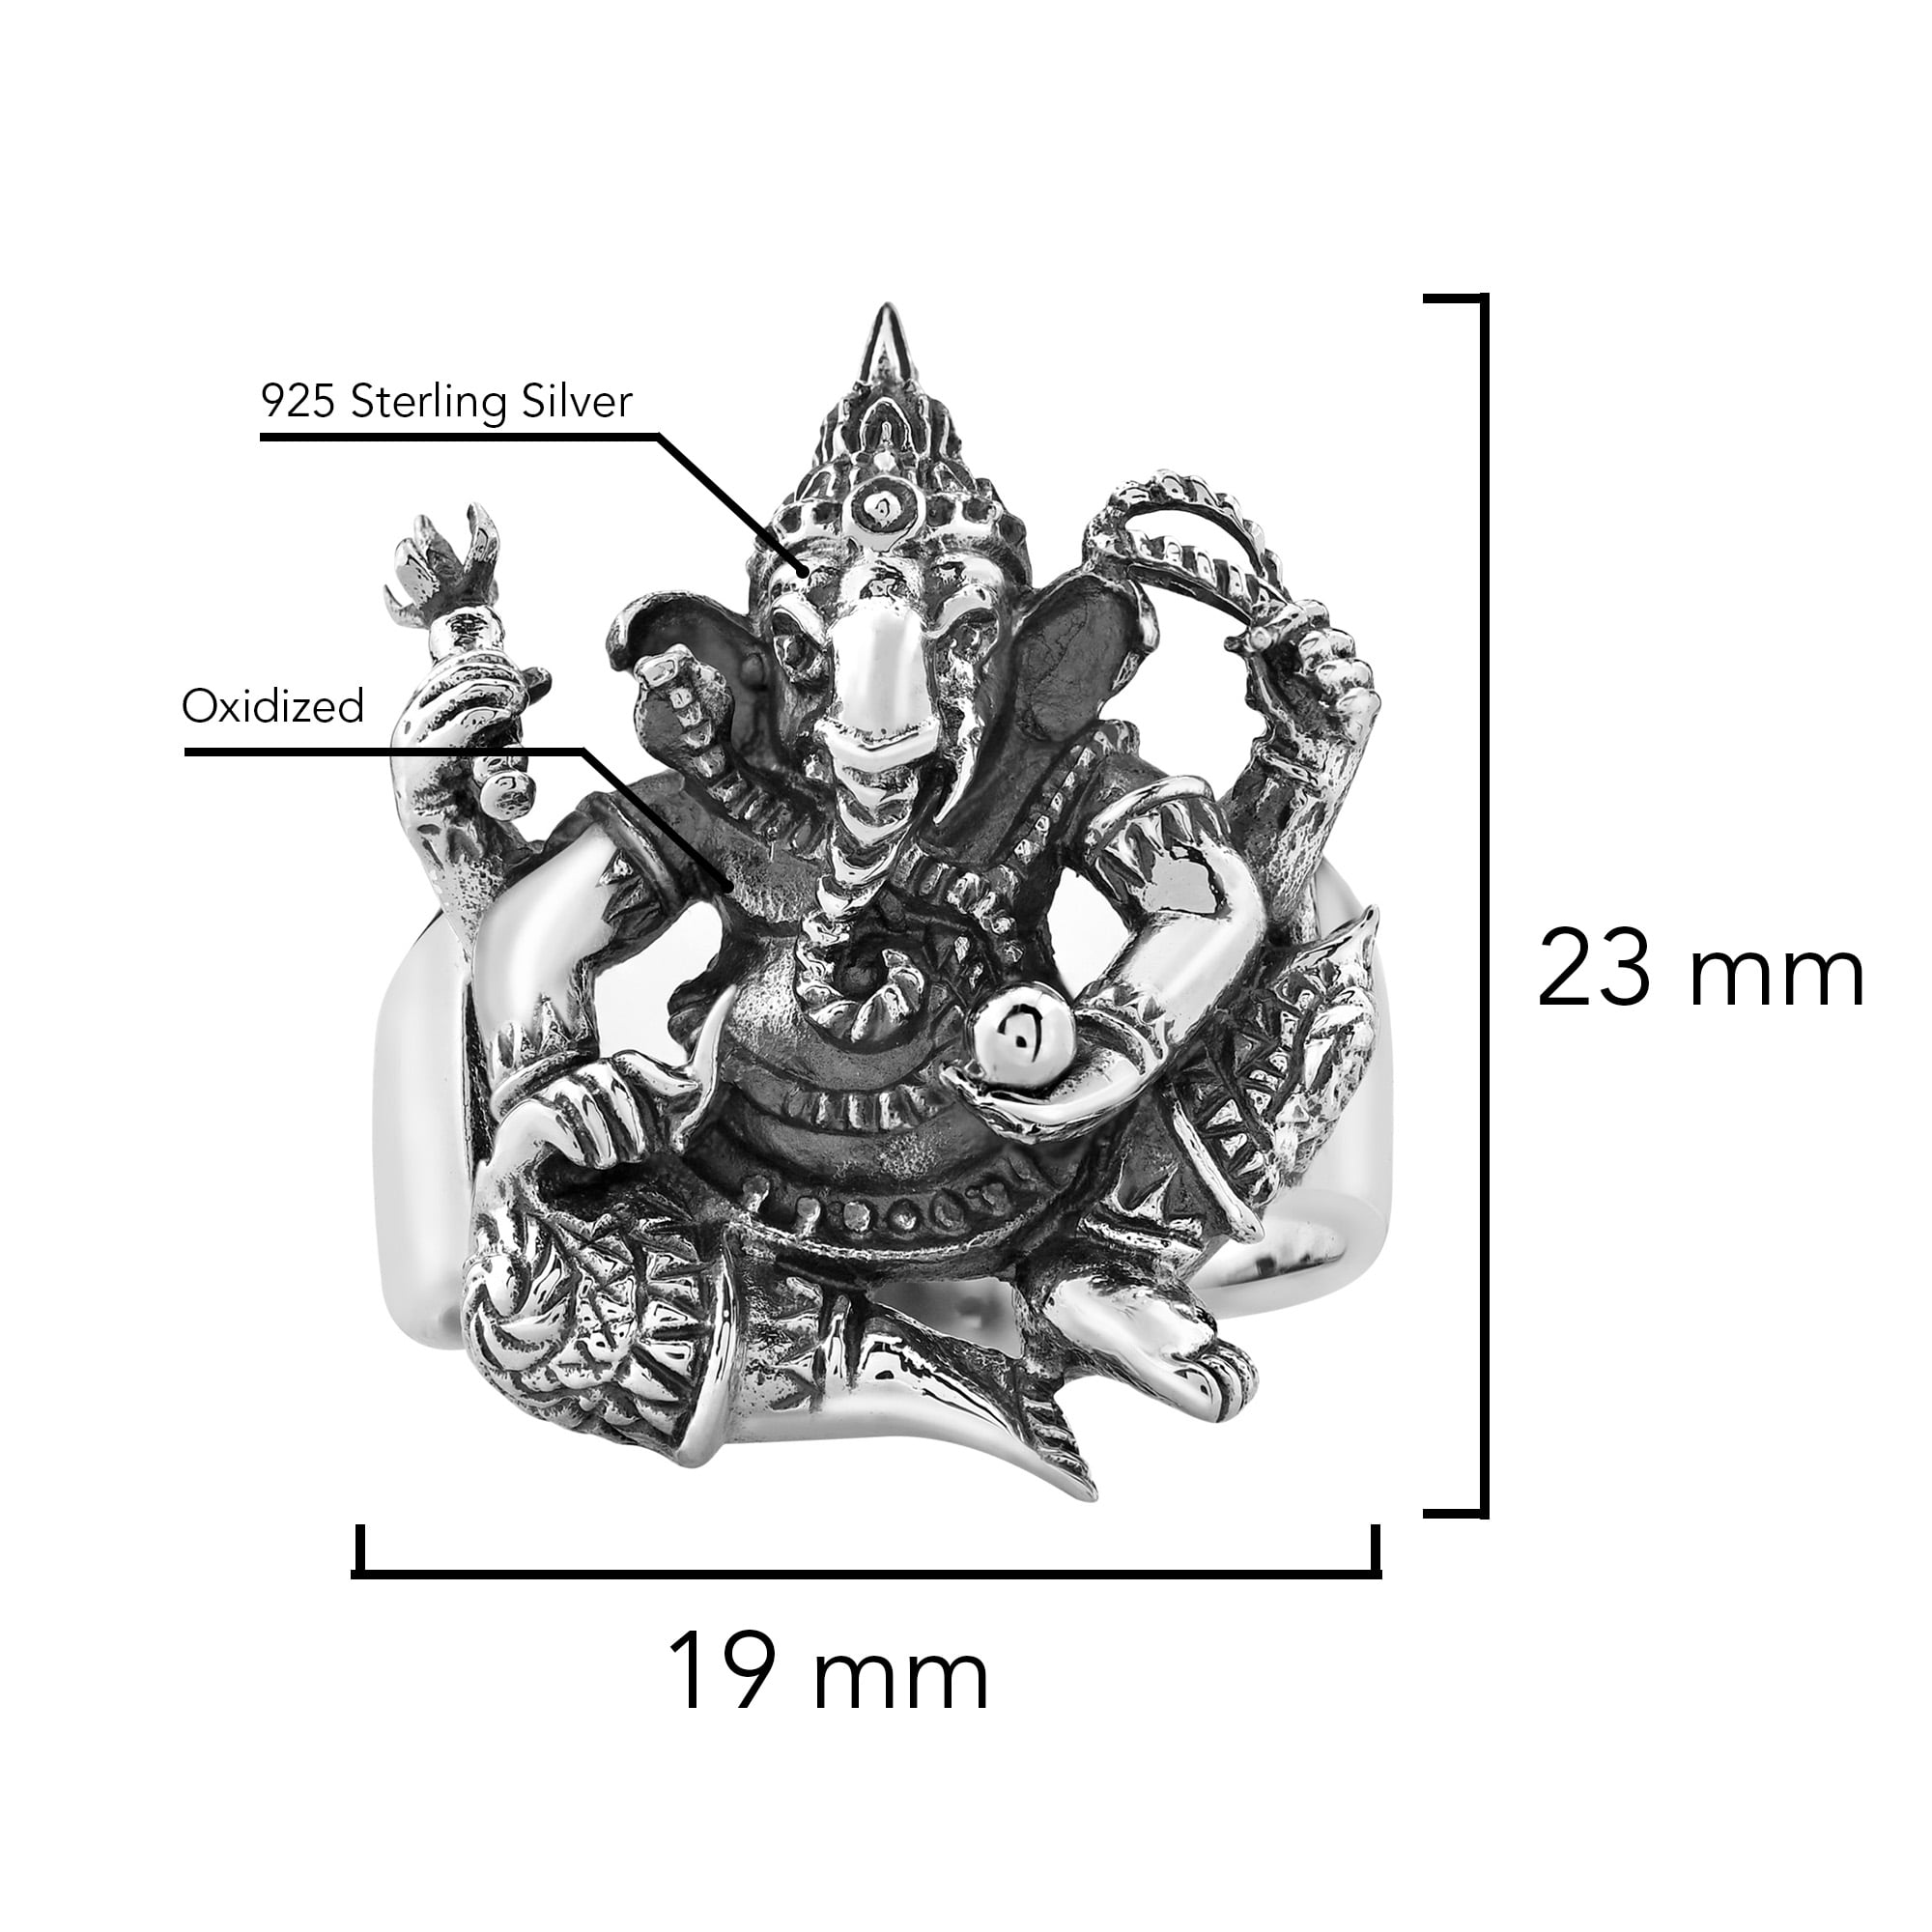 Goddess Laxmi or lord Ganesha Outside Silver Covering Inside Wax and Marble  Silver Idol W8 | TRIBAL ORNAMENTS